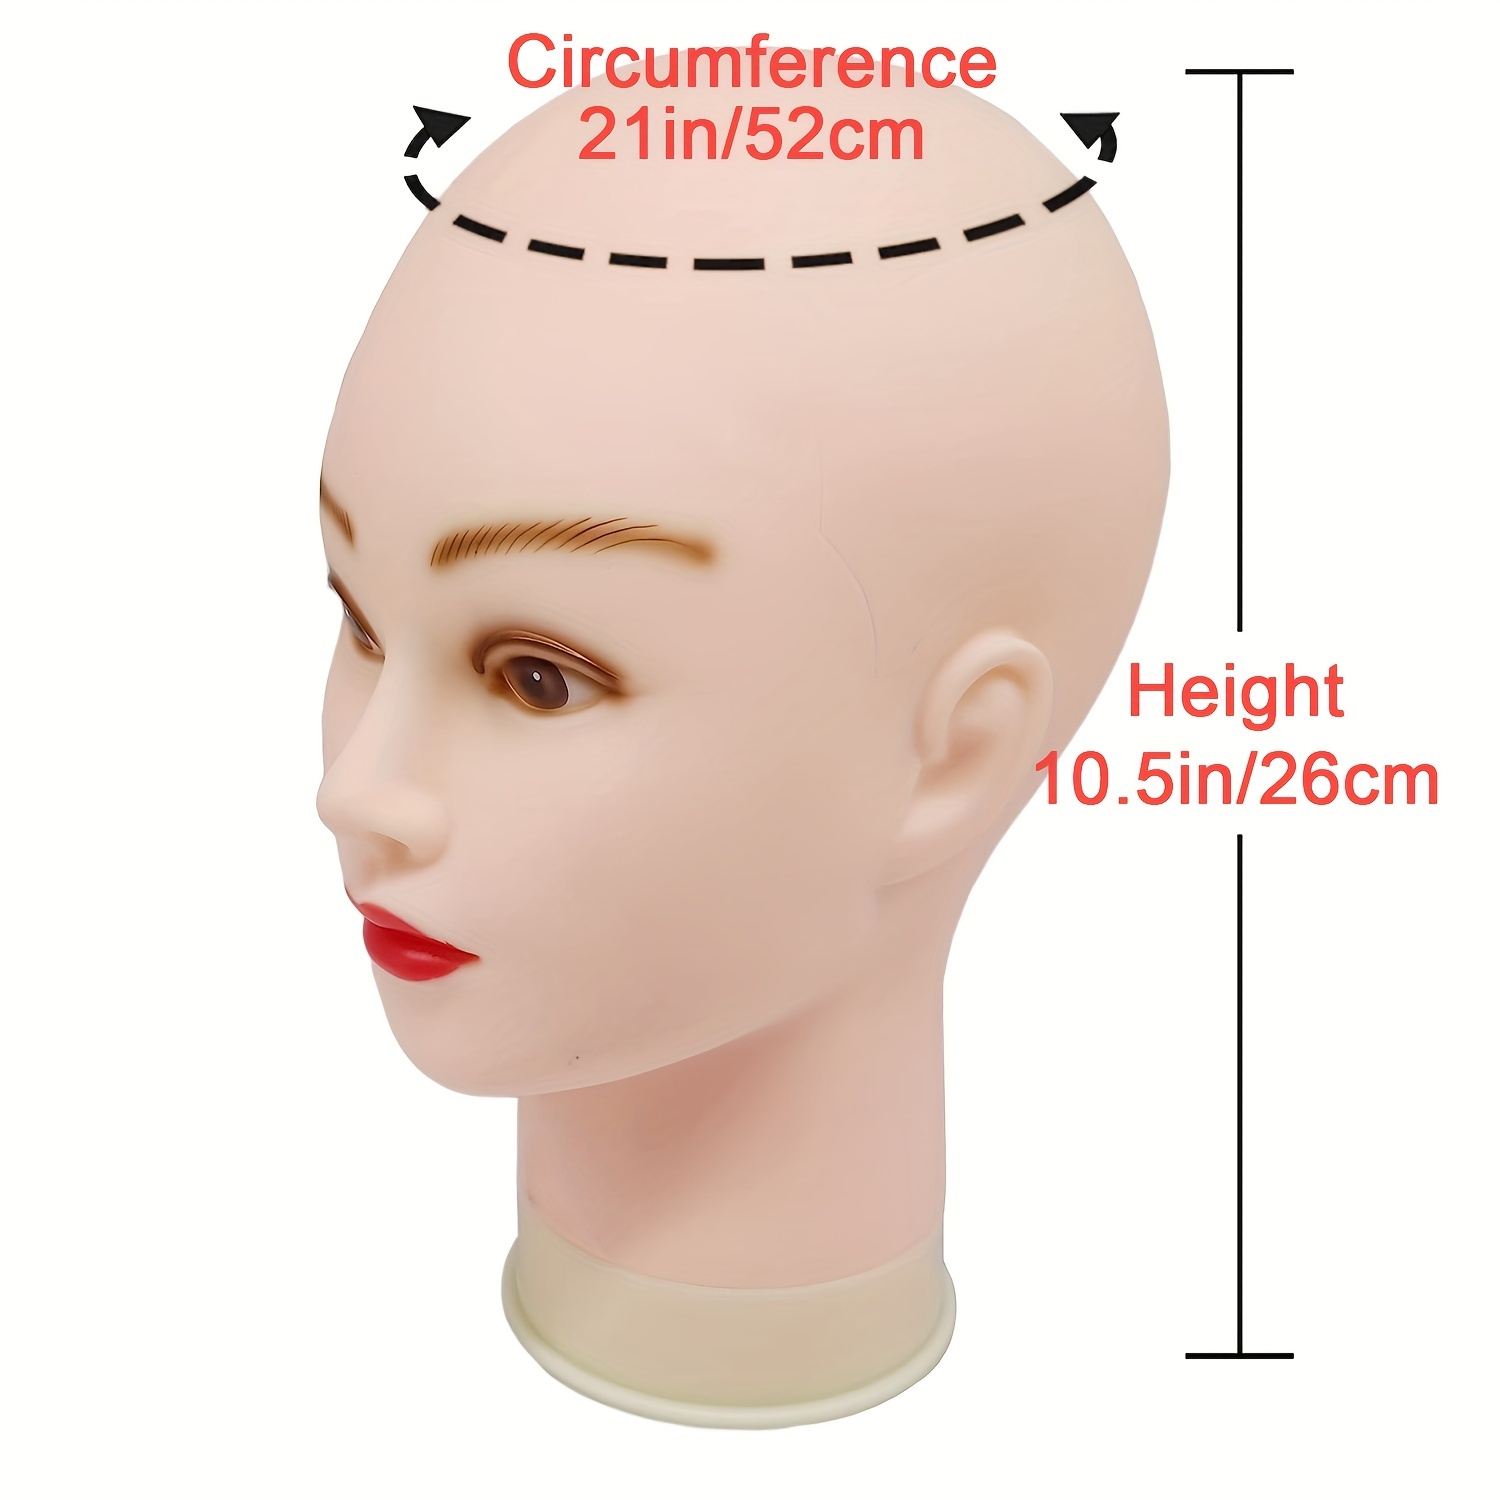 Wig Head Bald Mannequin Head for Wigs Female Training Doll Head for  Professiona